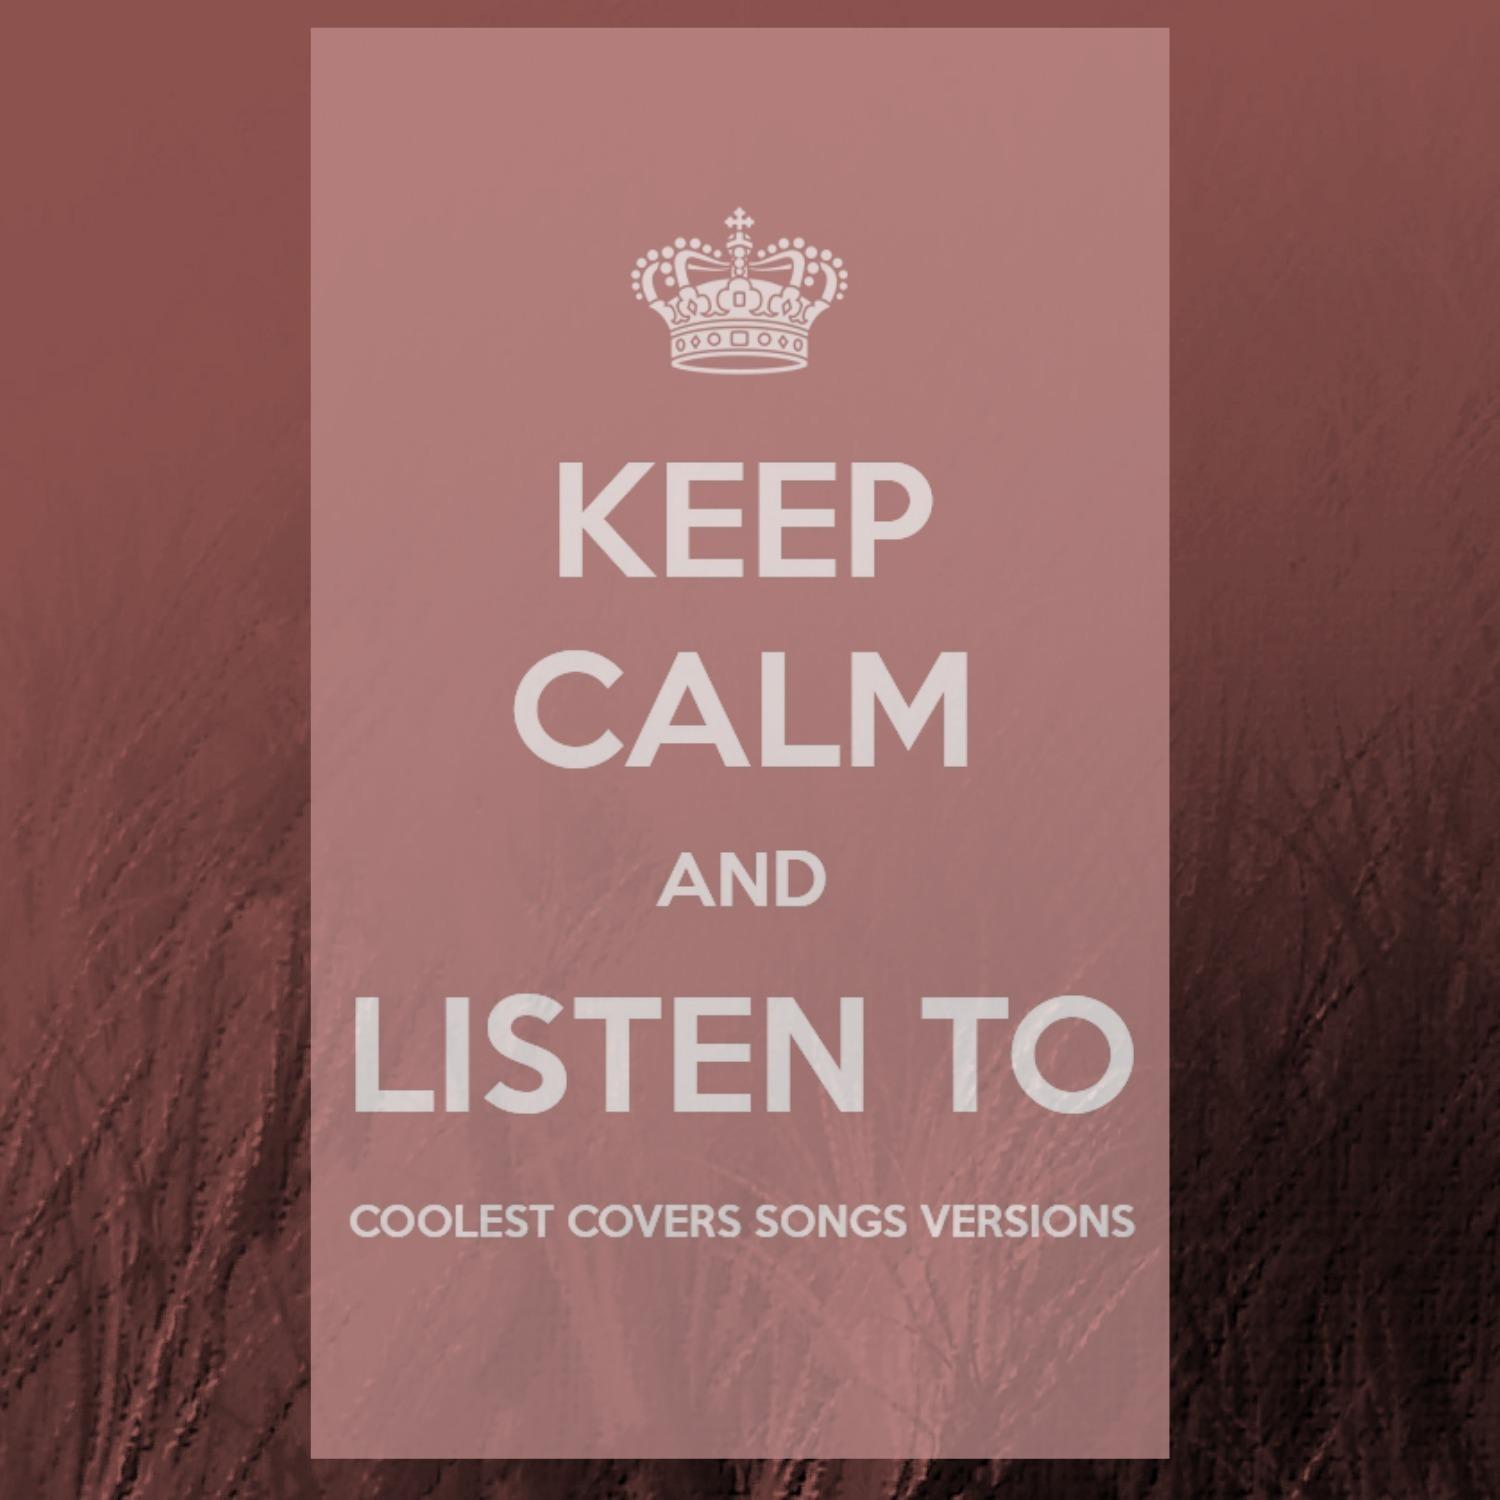 Keep Calm and Listen to Coolest Covers Songs Versions